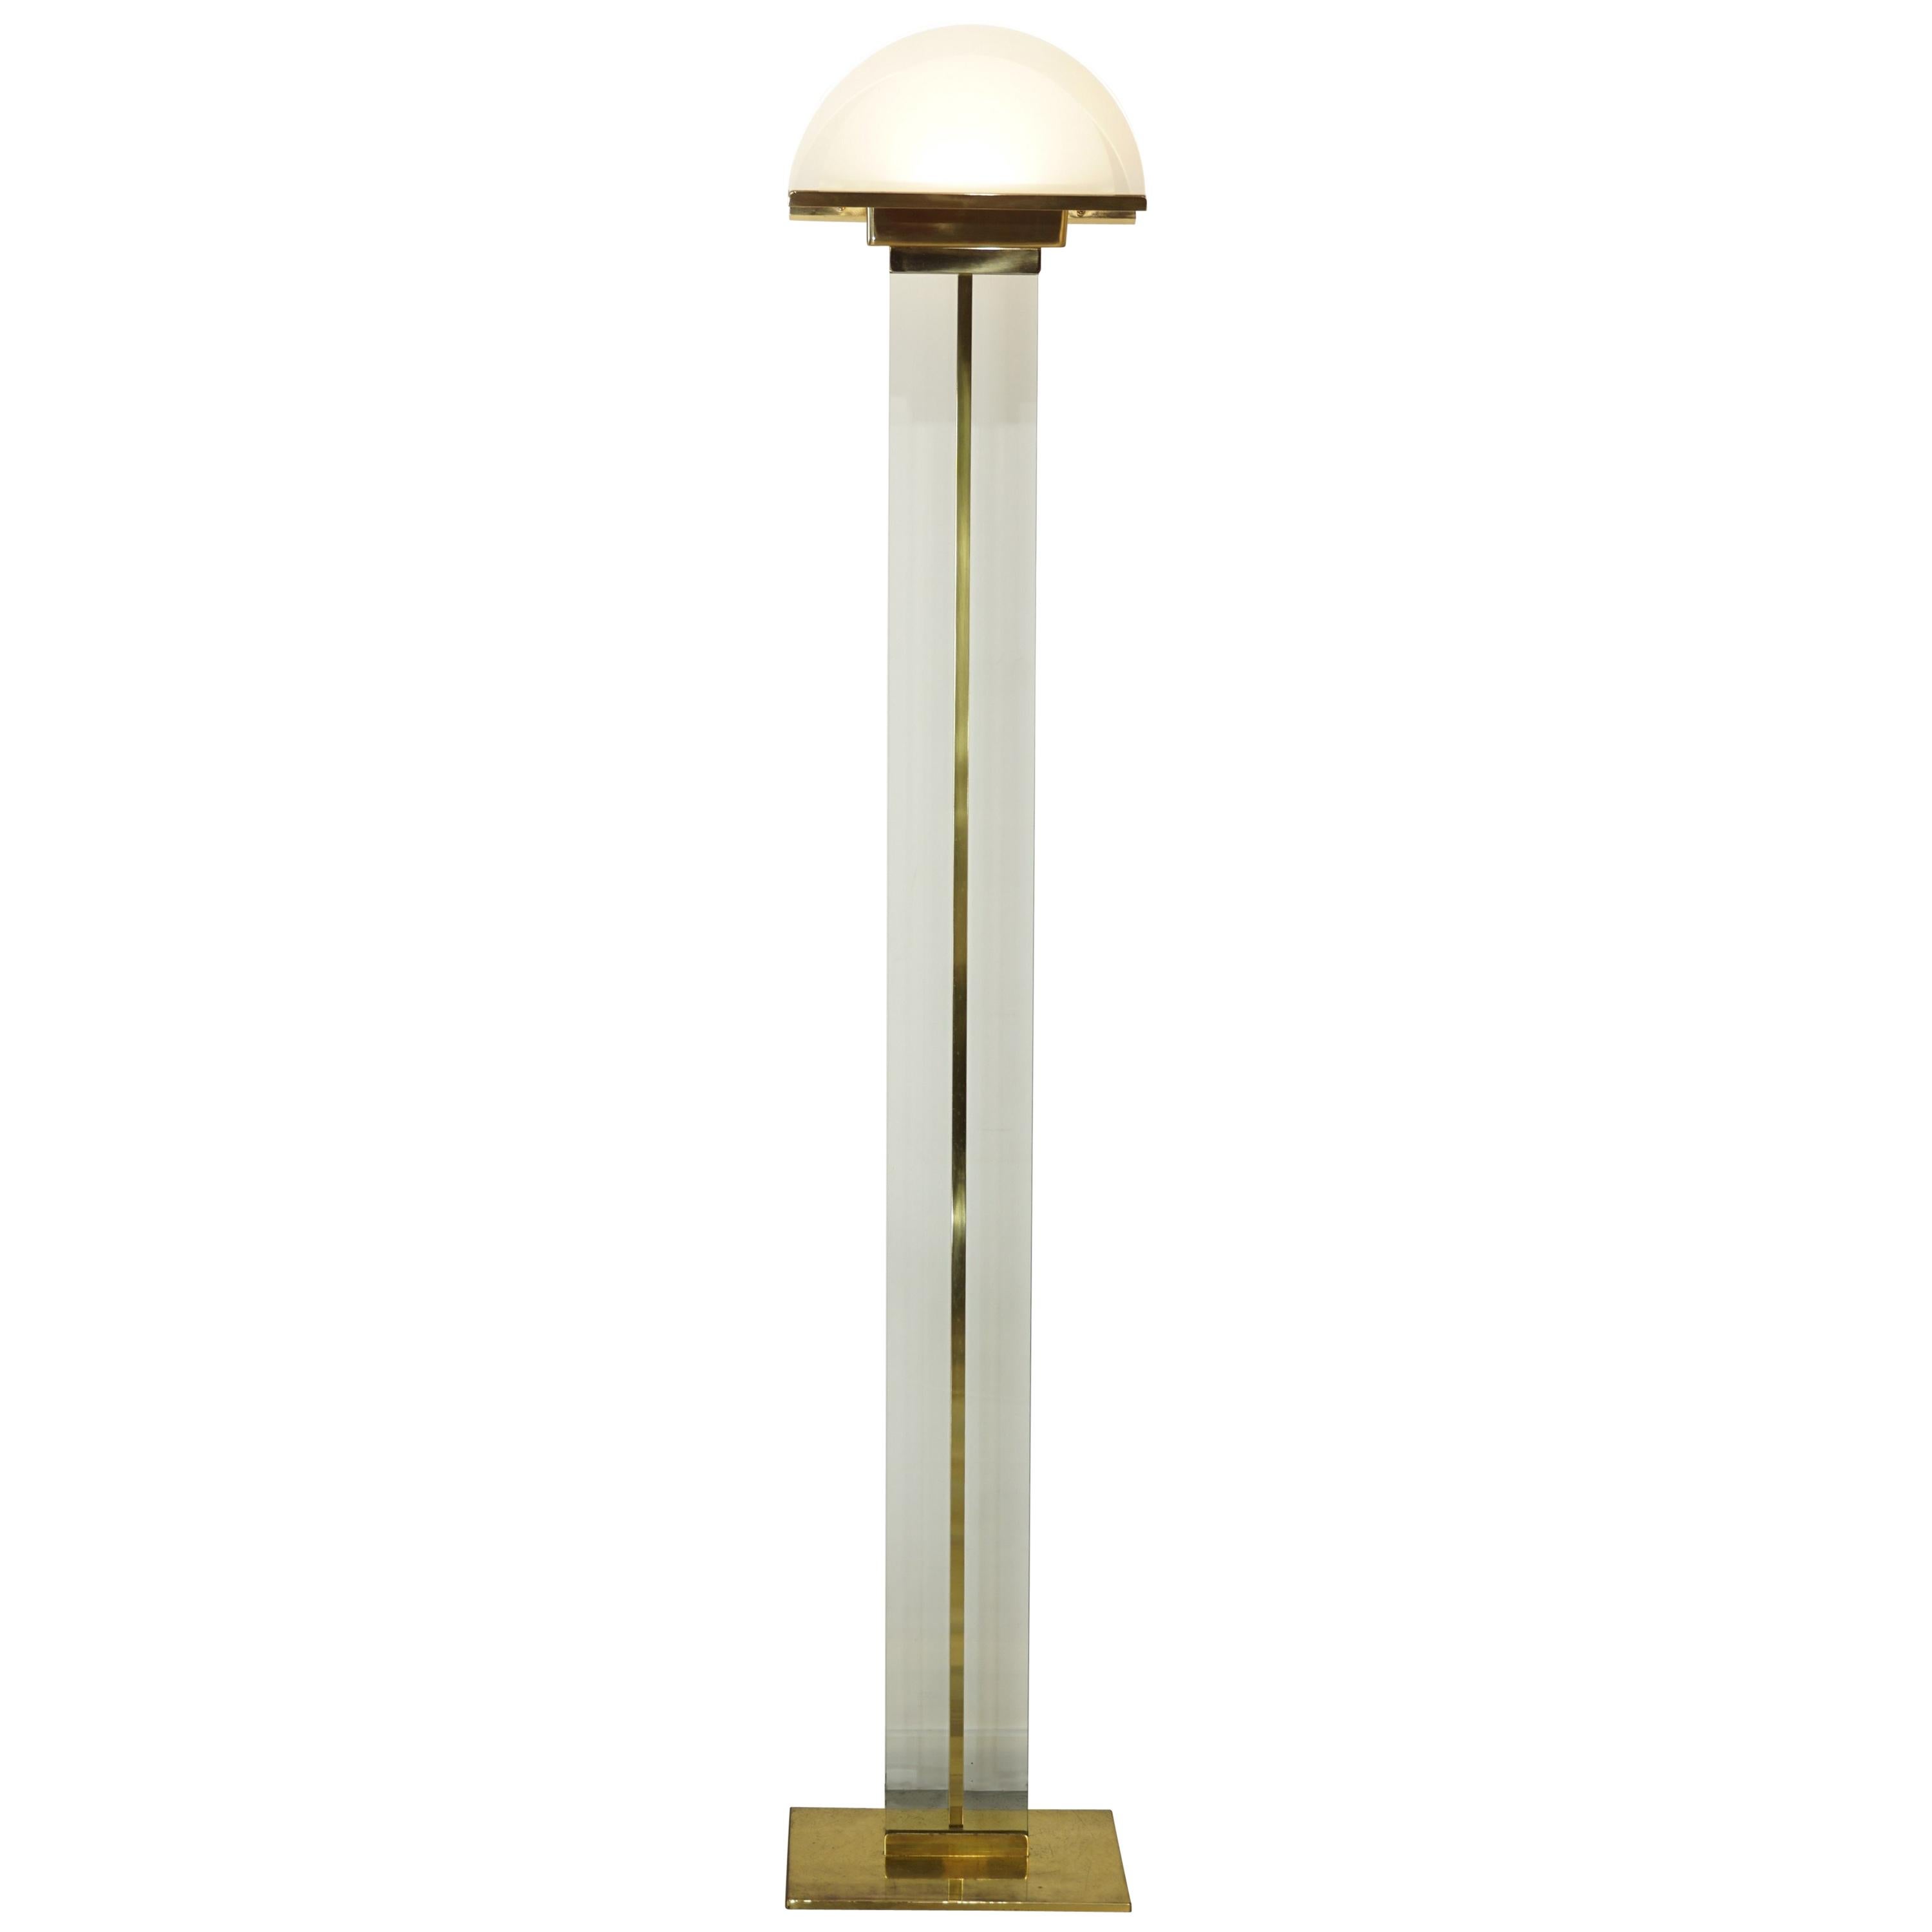  Italian Design from the 1970s by Mauro Martini Brass and Glass Floor Lamp